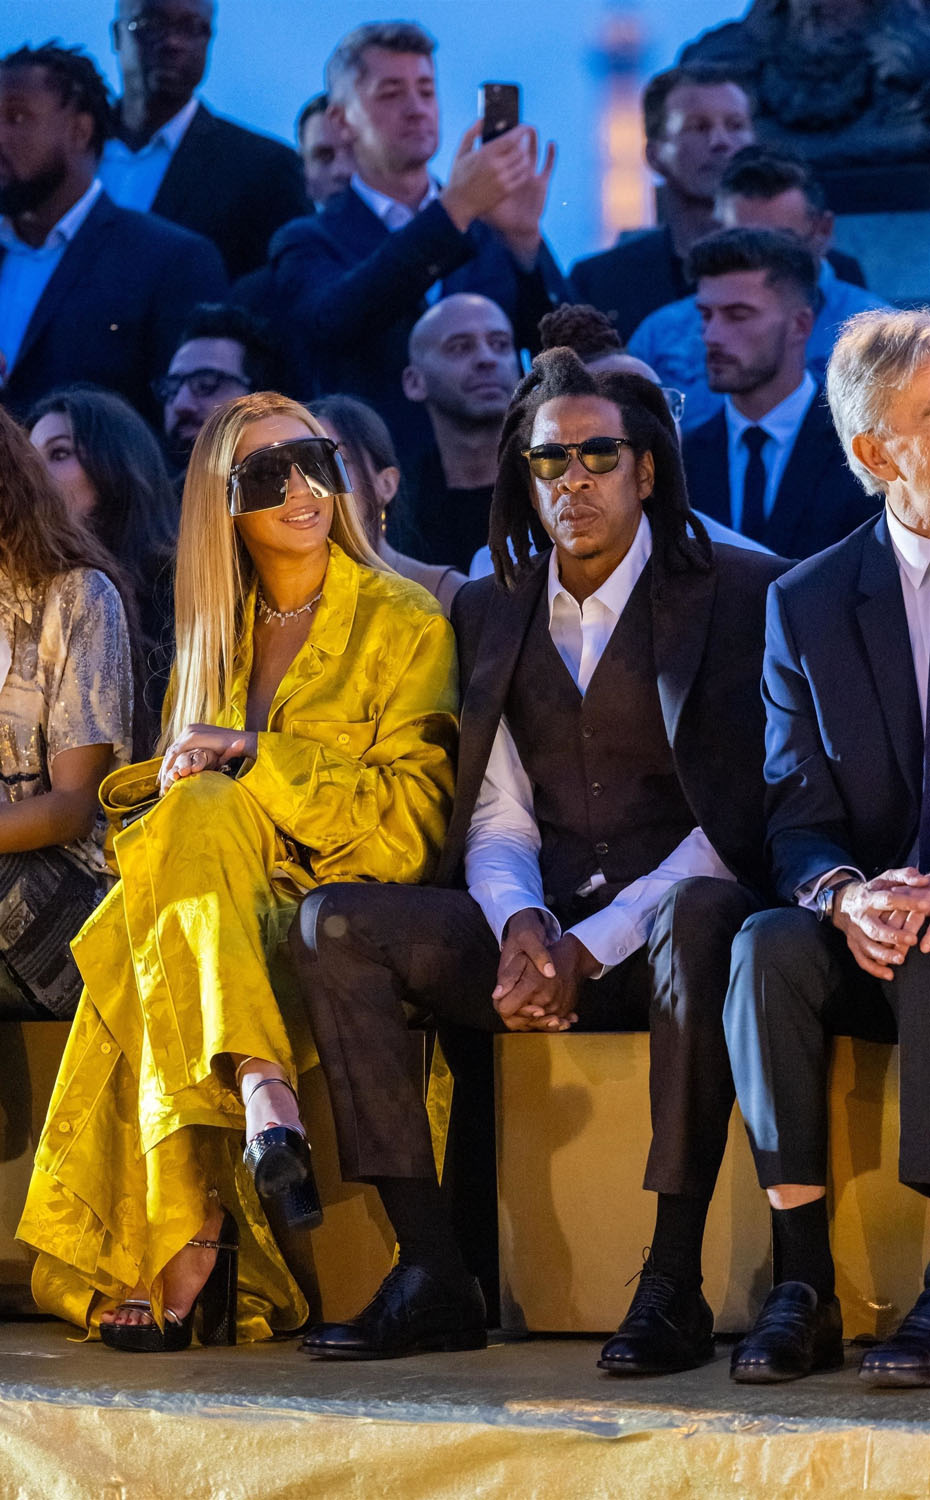 There were so many A-List stars at the @louisvuitton fashion show in Paris,  including Beyonce, Jay-Z, Zendaya, Rihanna, A$AP Rocky, Kim…